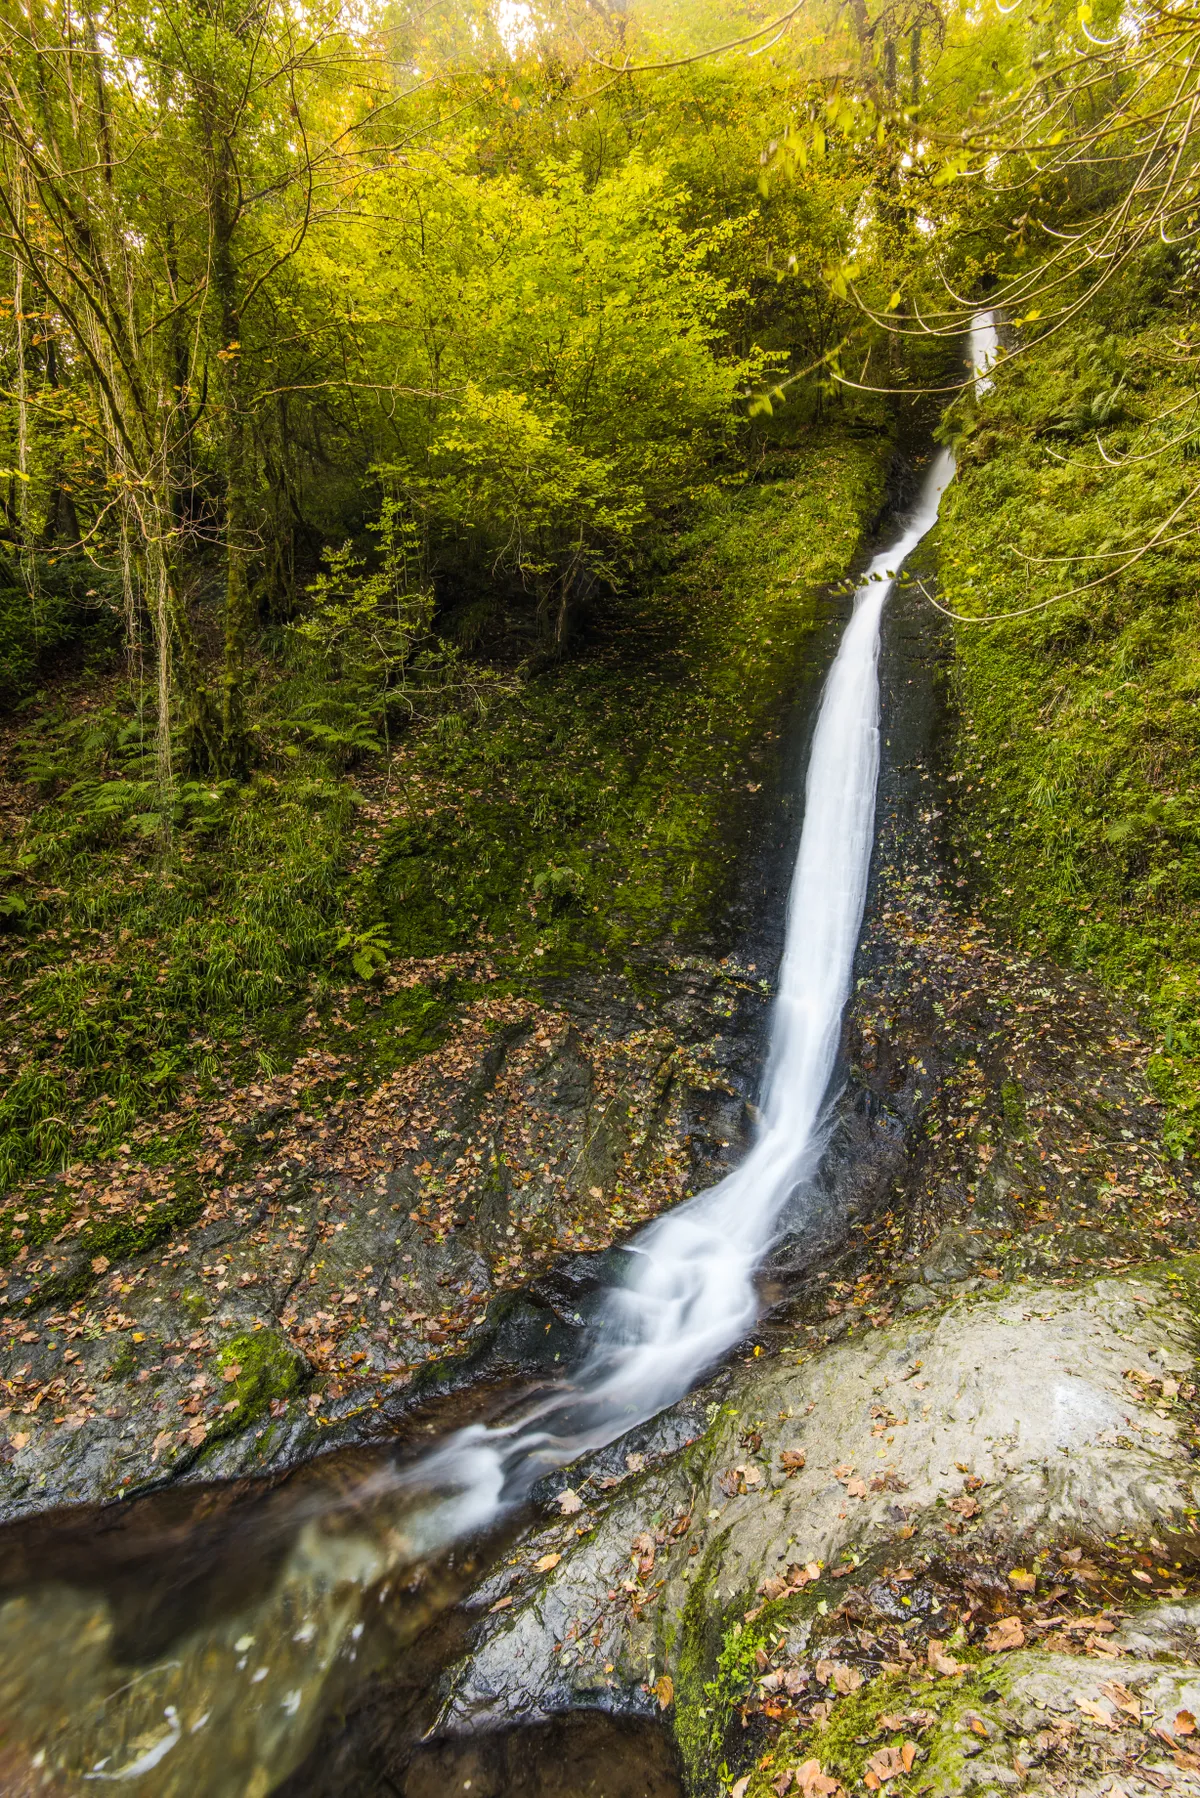 White Lady waterfall in Lydford Gorge, UK in autumn scenery